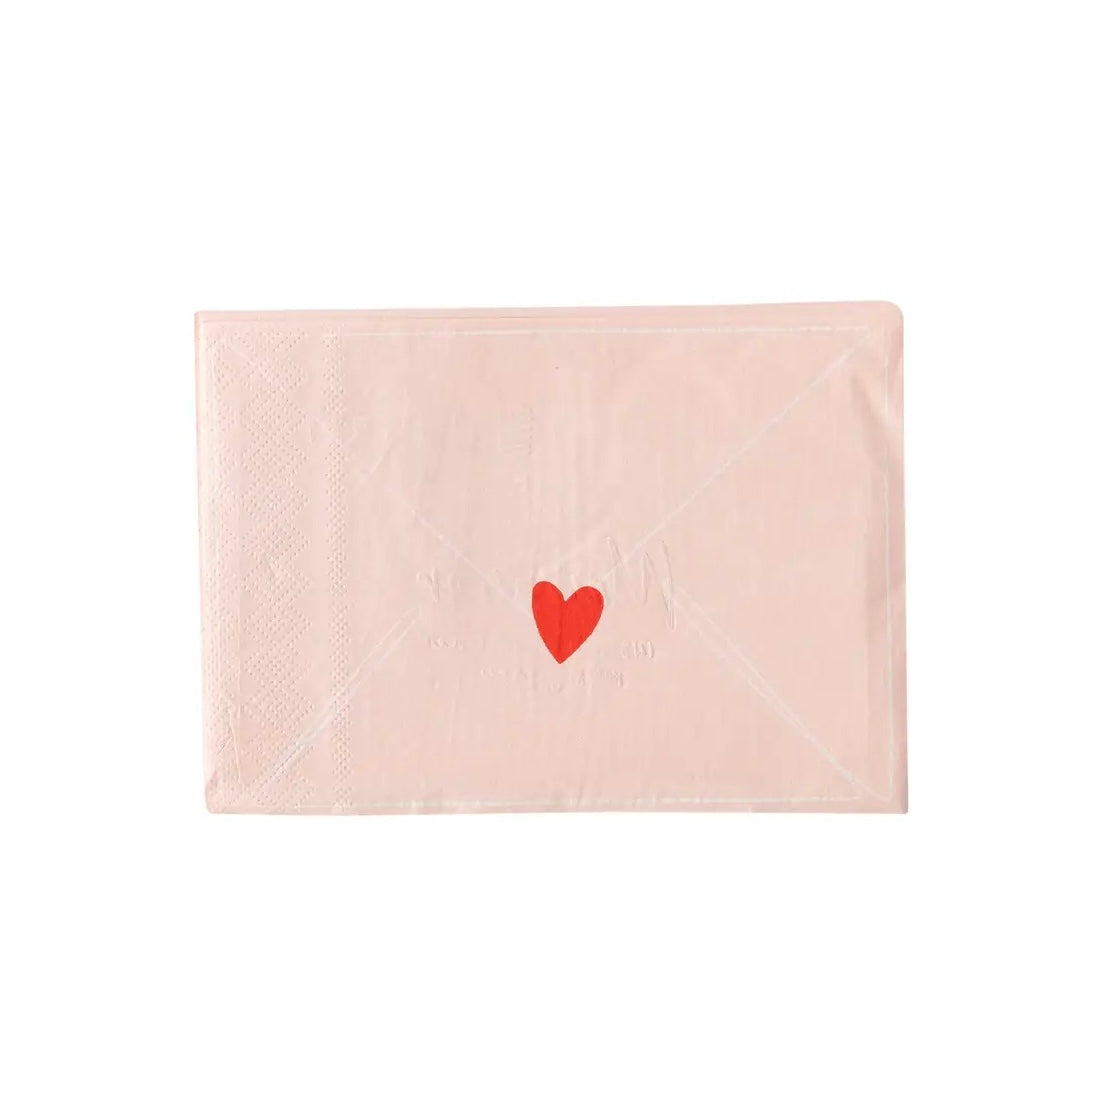 NAPKINS SMALL - VALENTINES LOVE NOTE FROM PARIS